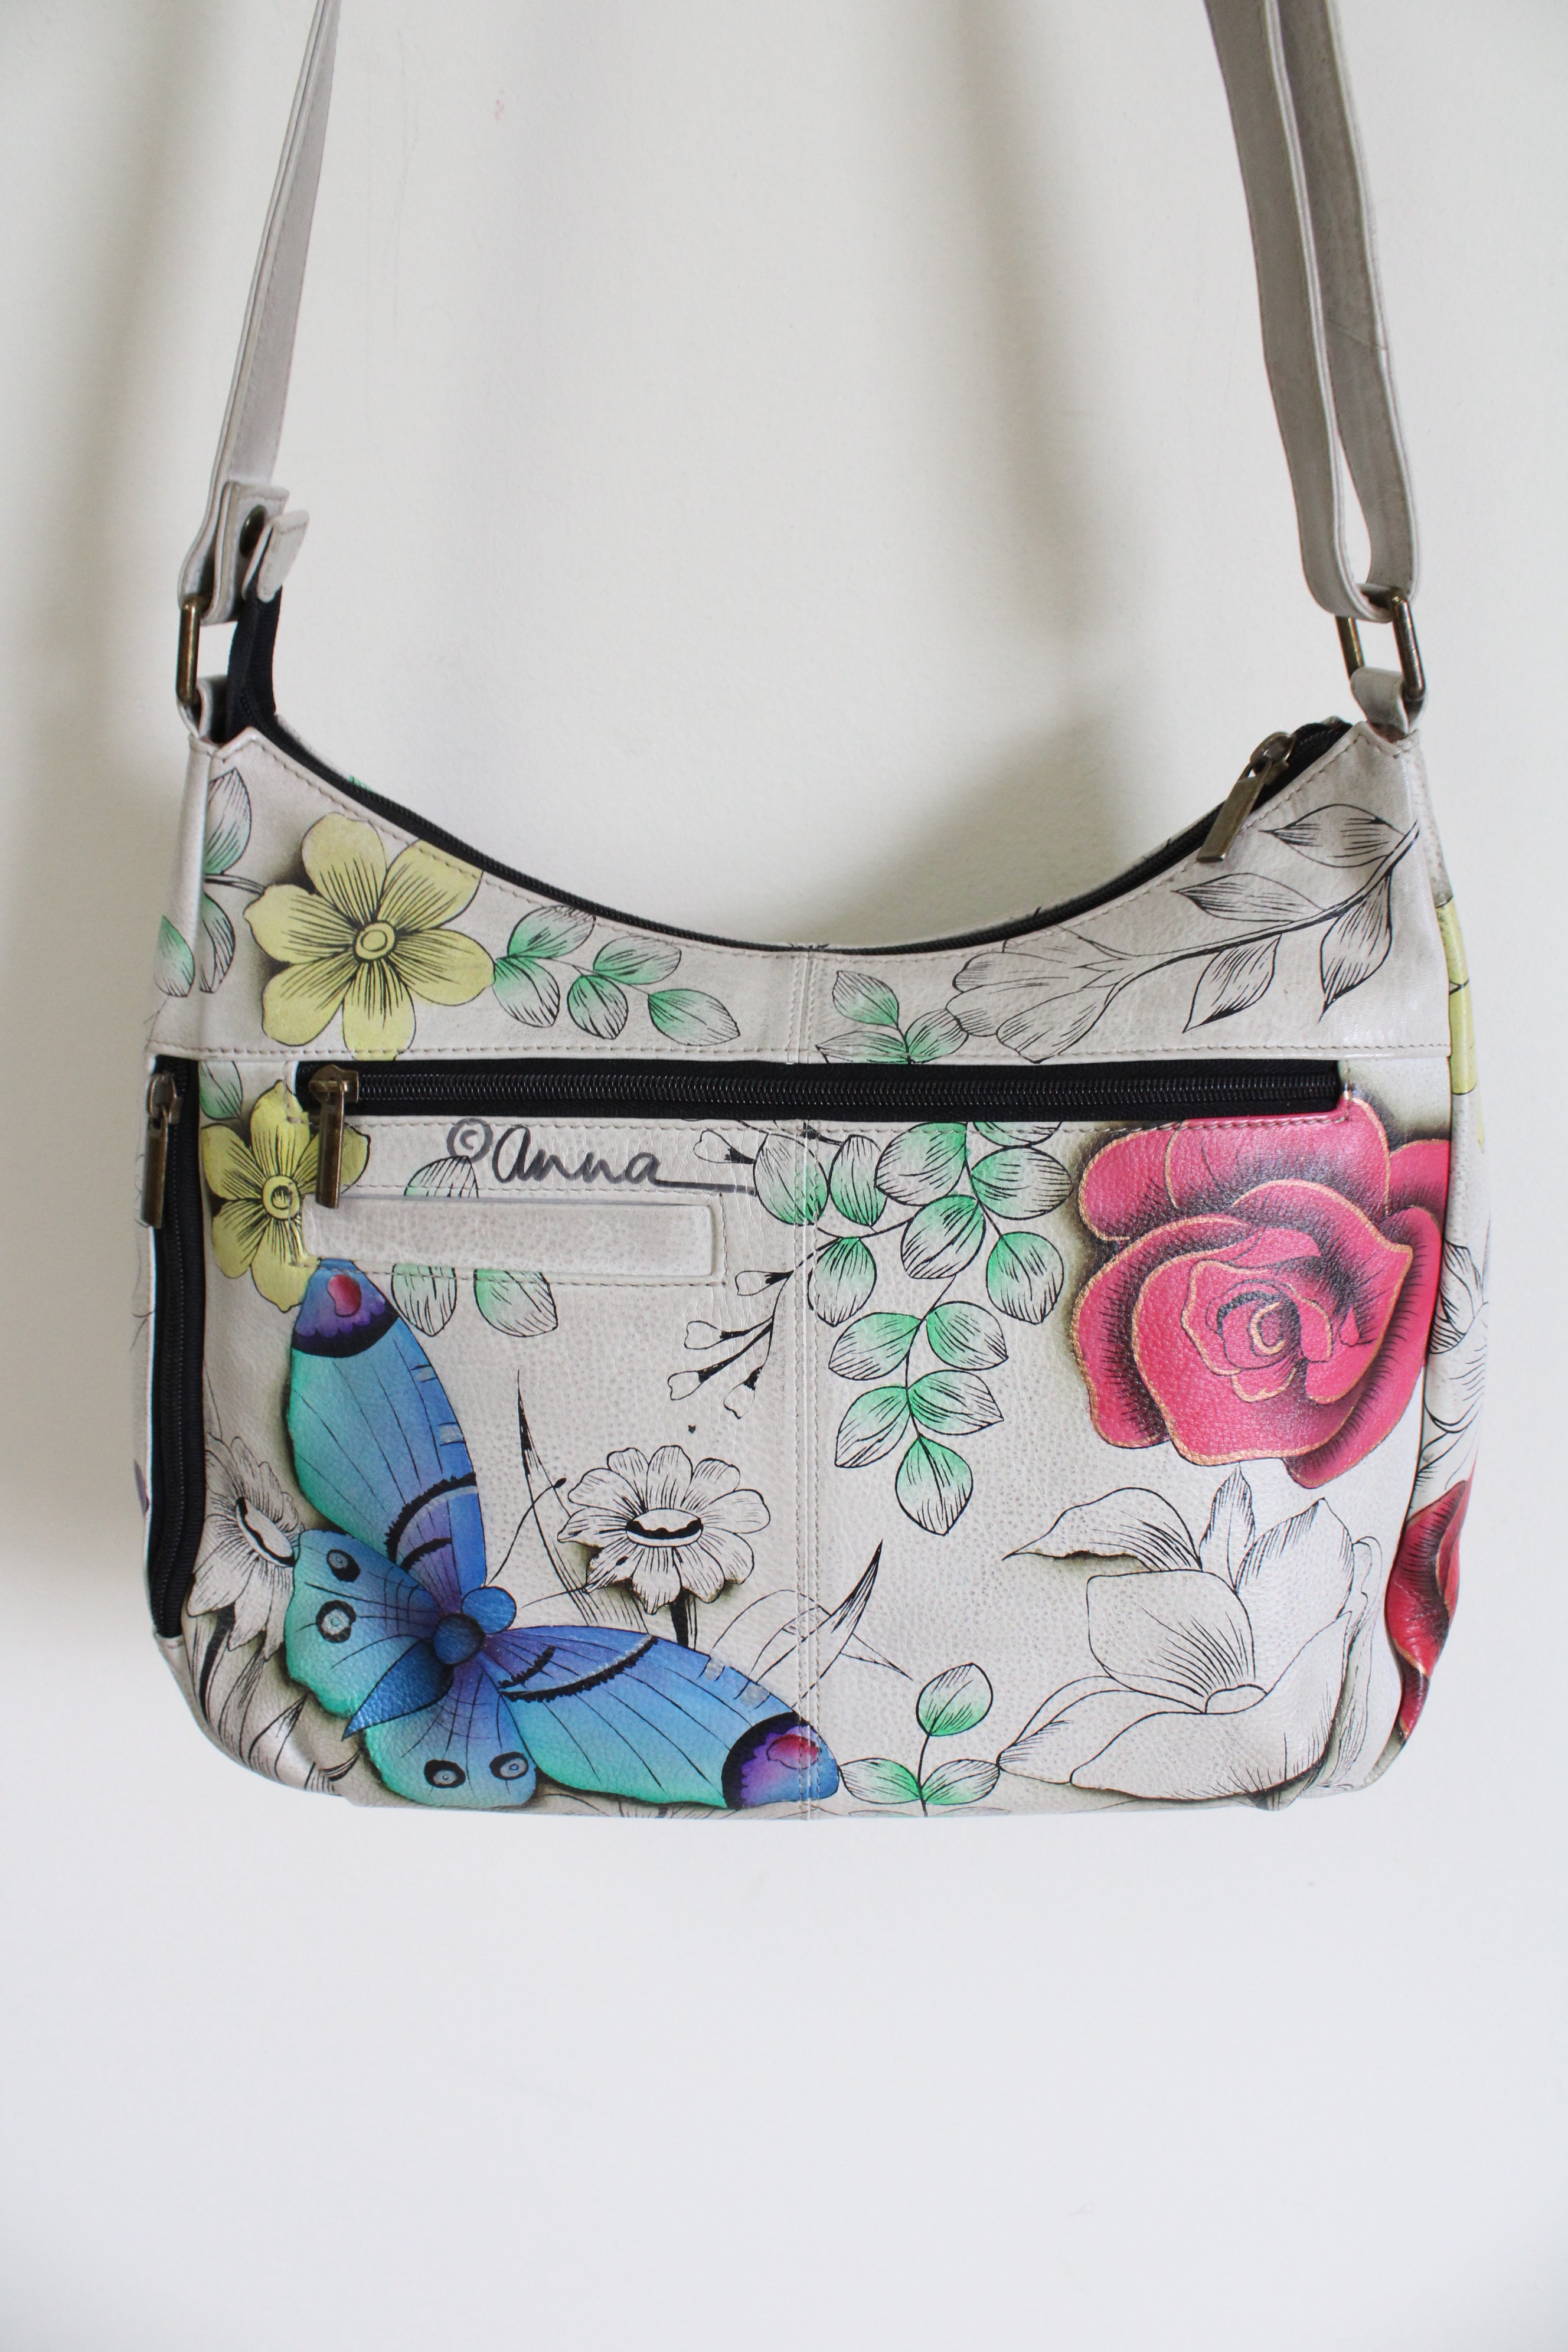 Anna by Anuschka Women's Genuine Leather Floral Paradise Purse